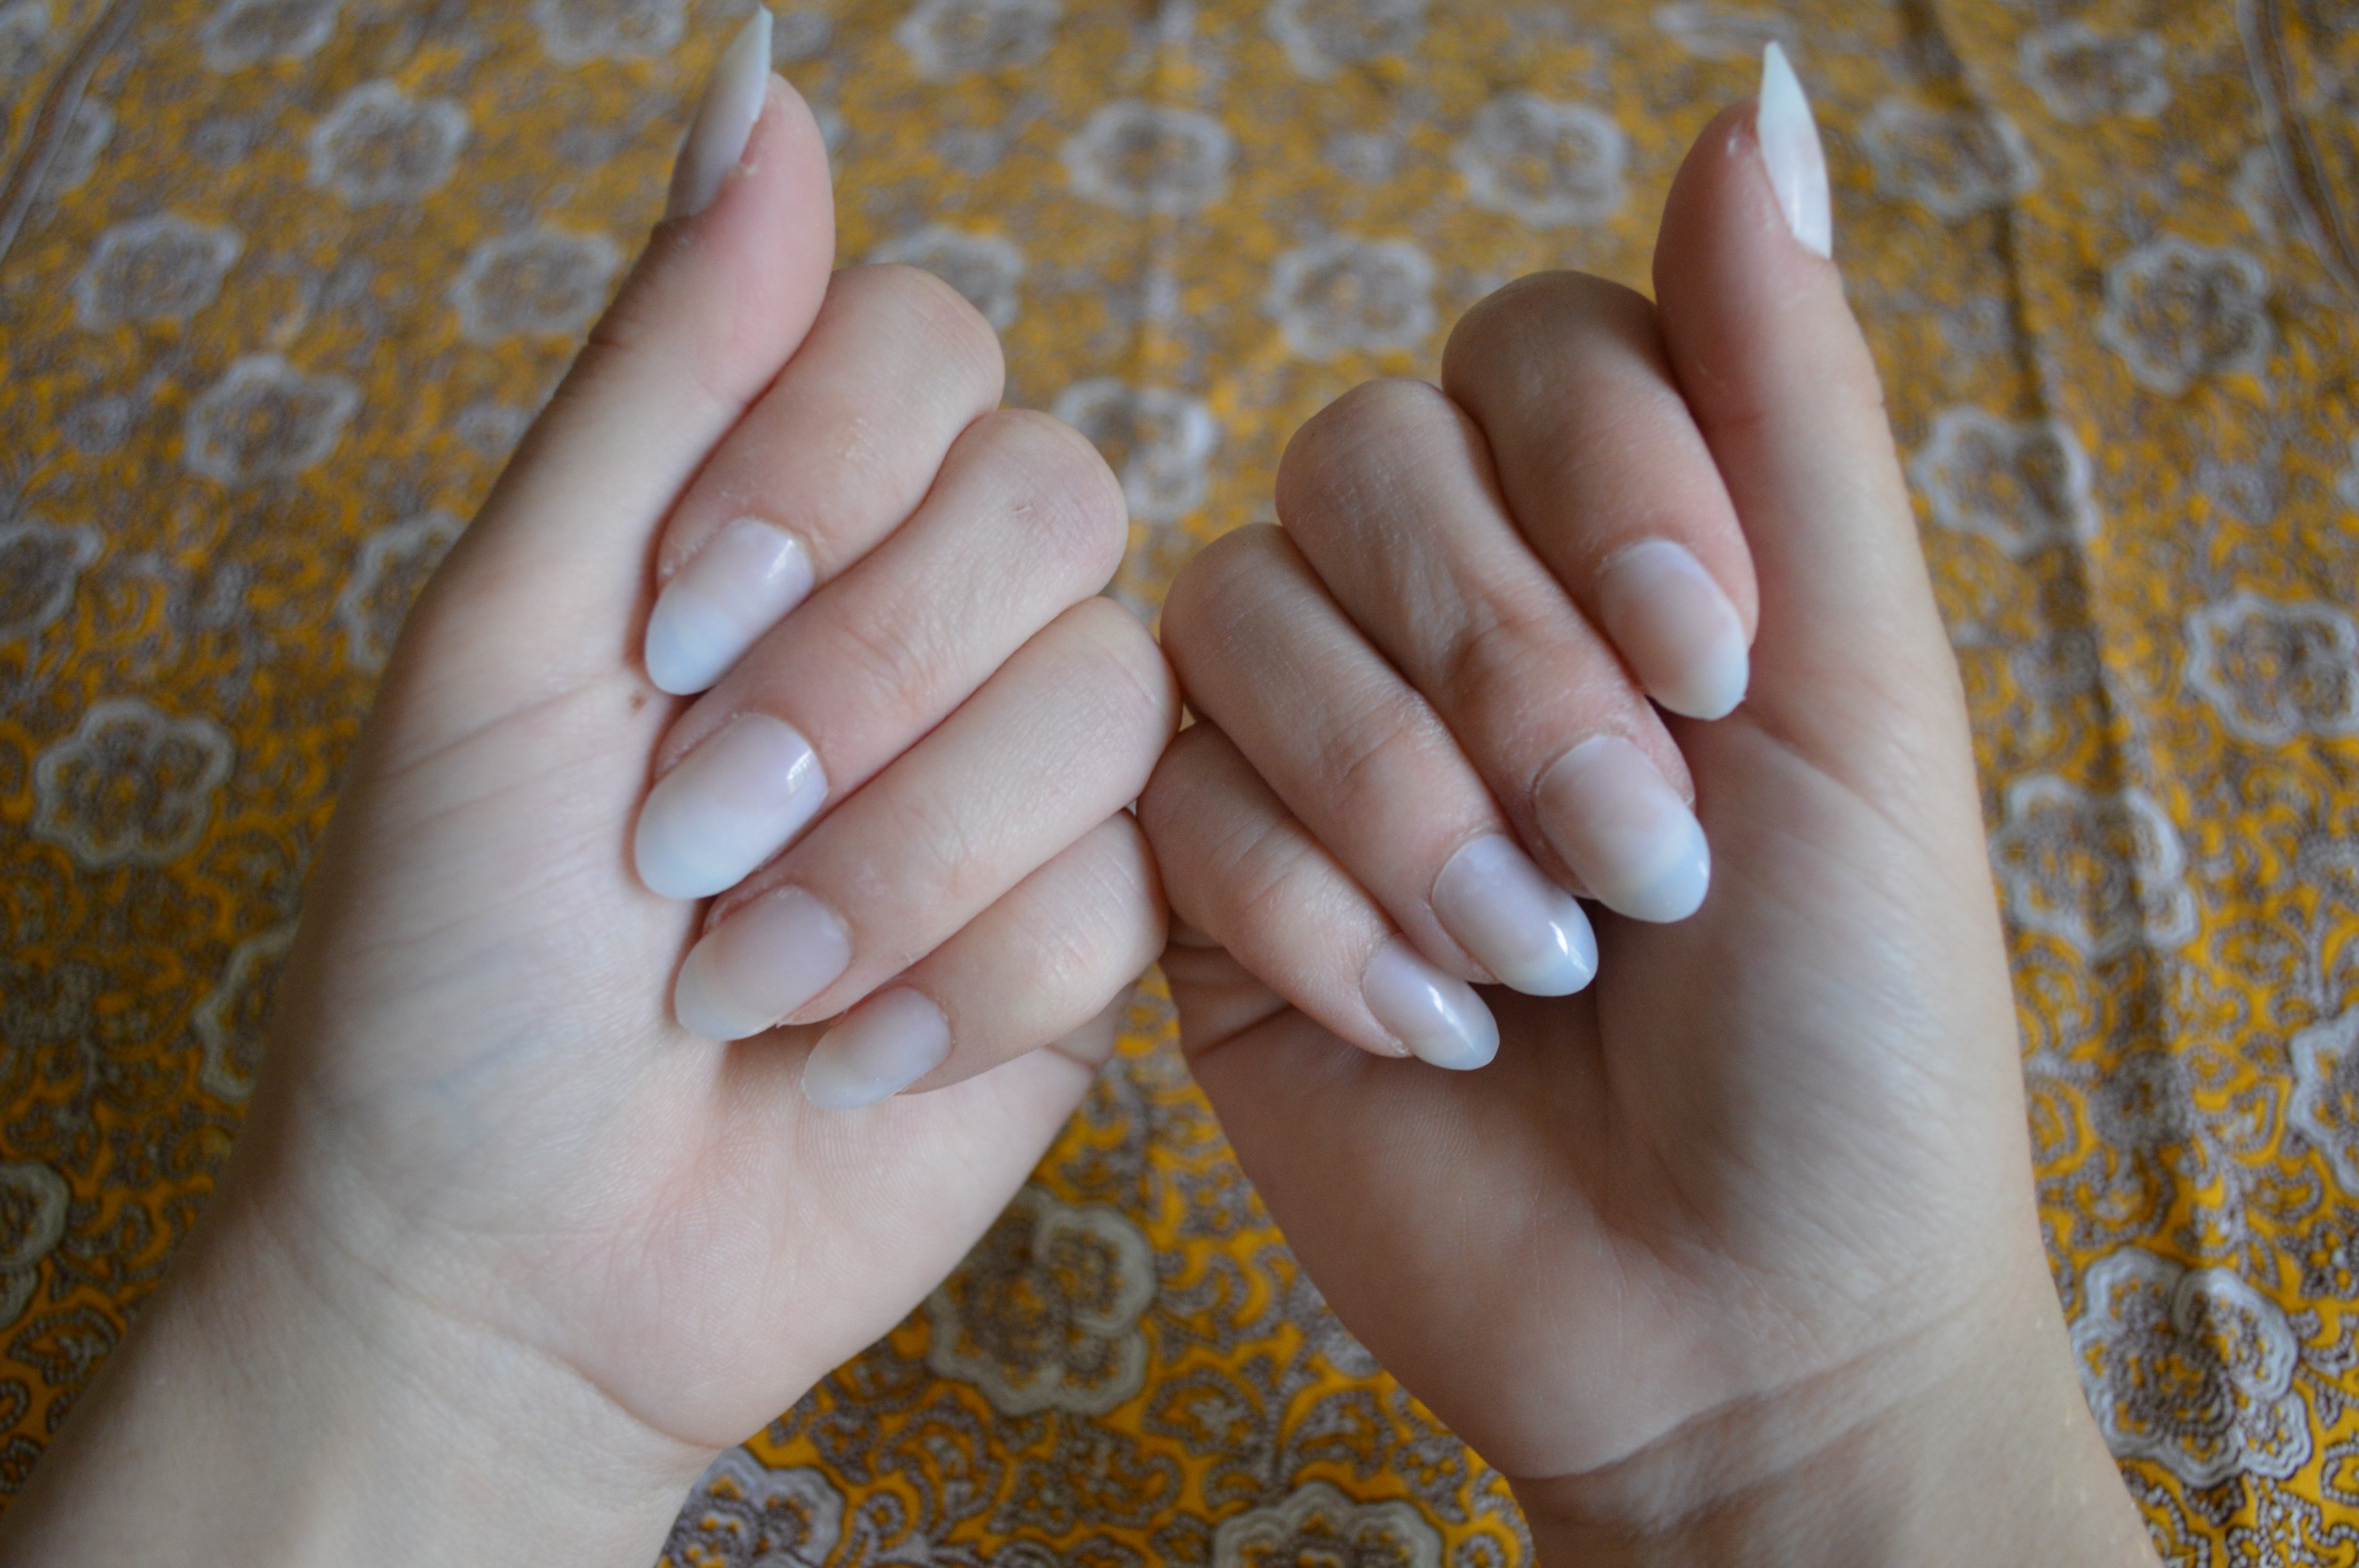 20 Half-Moon Manicure Designs to Try